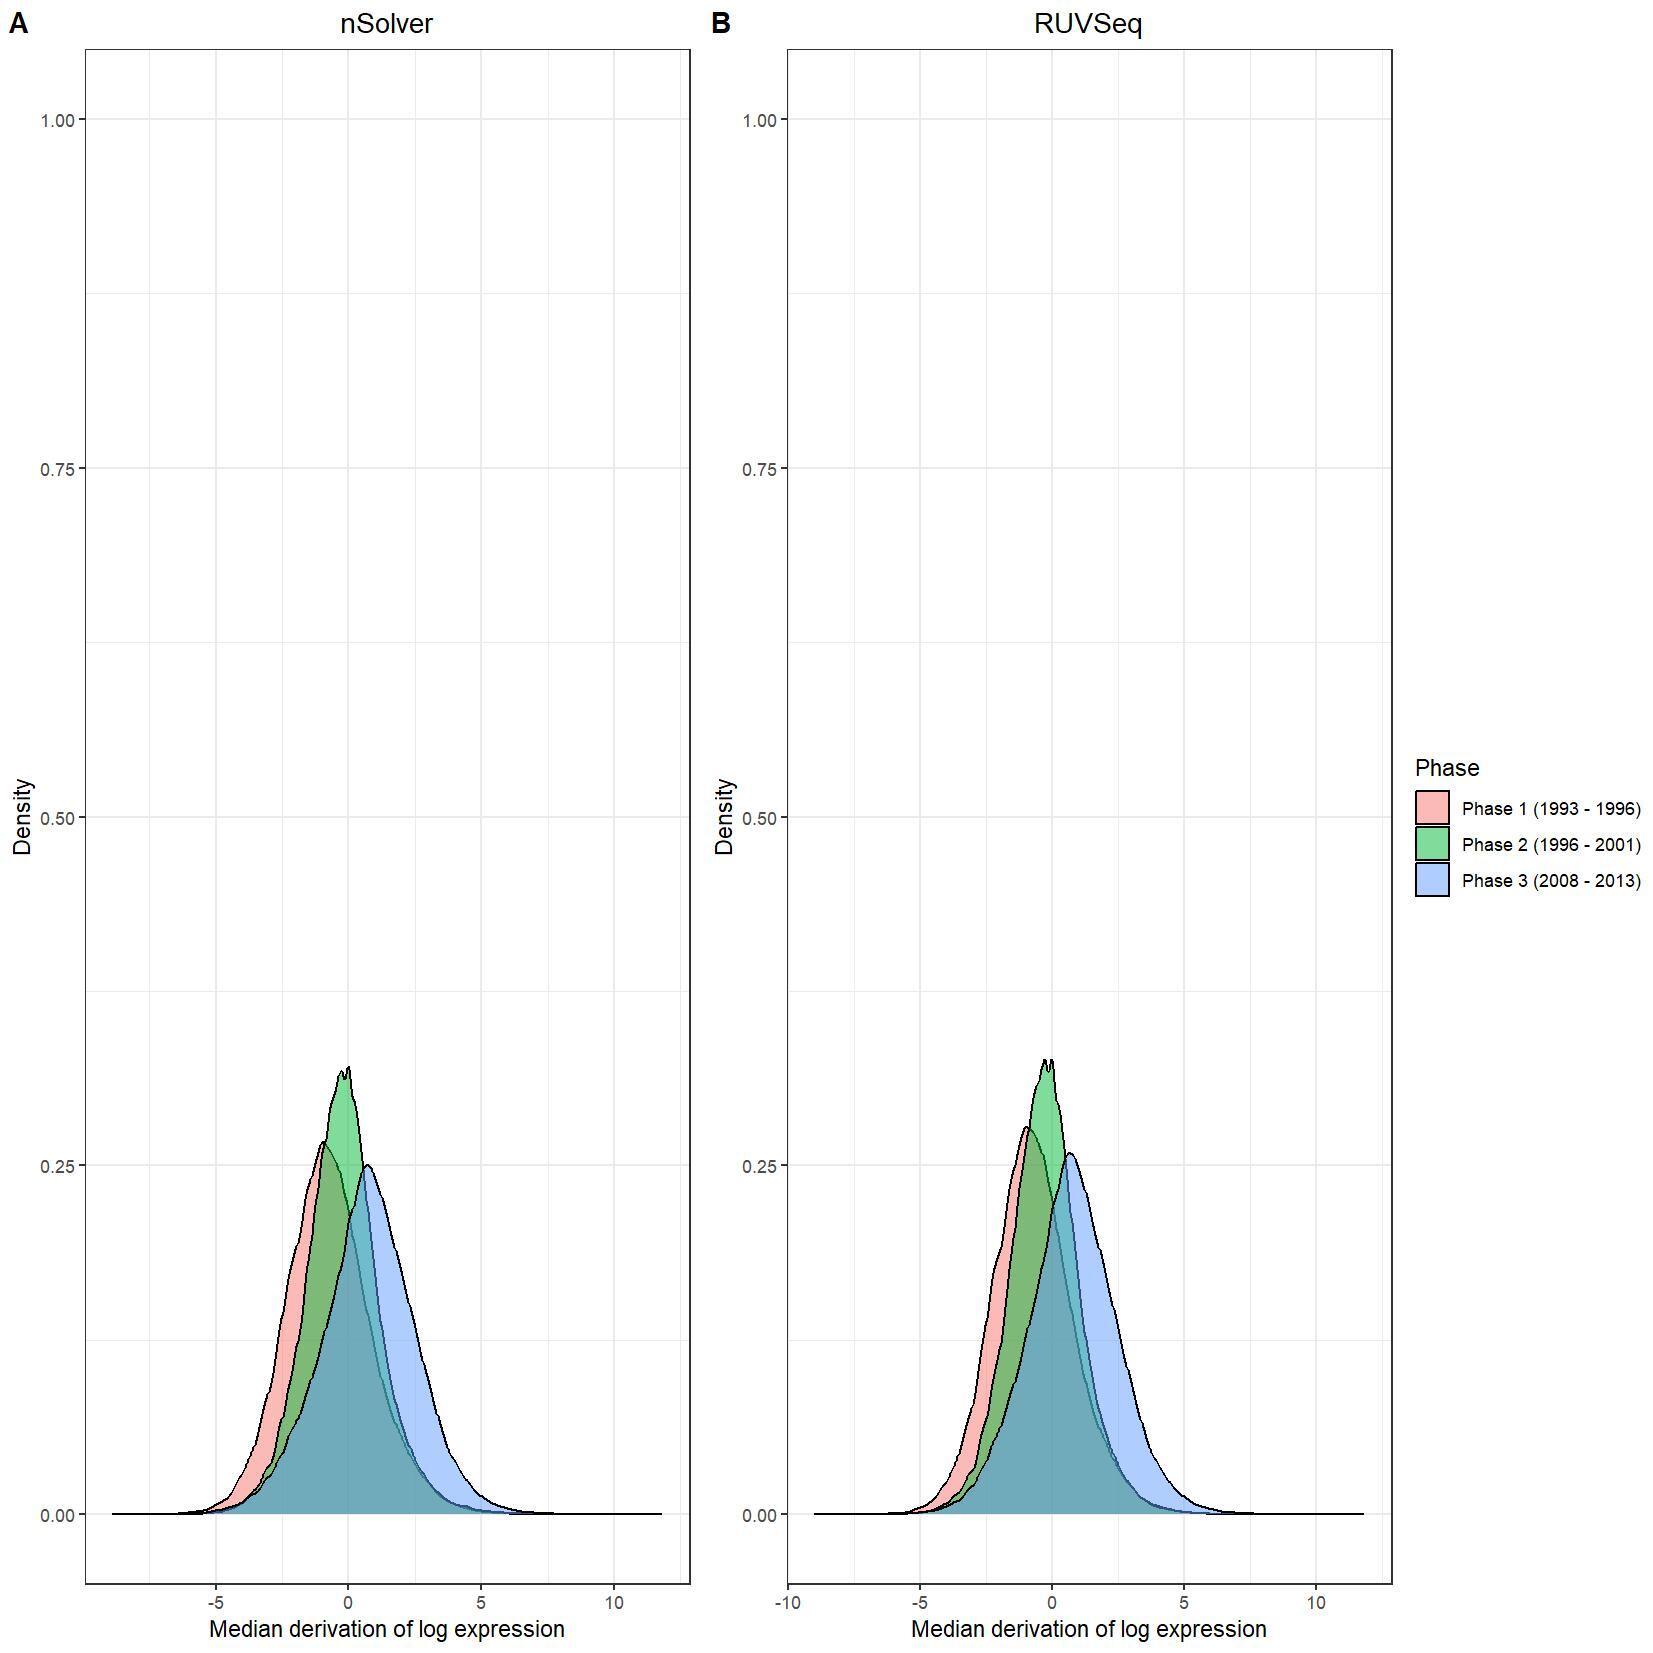 Density plots of nSolver and RUVSeq normalized data.